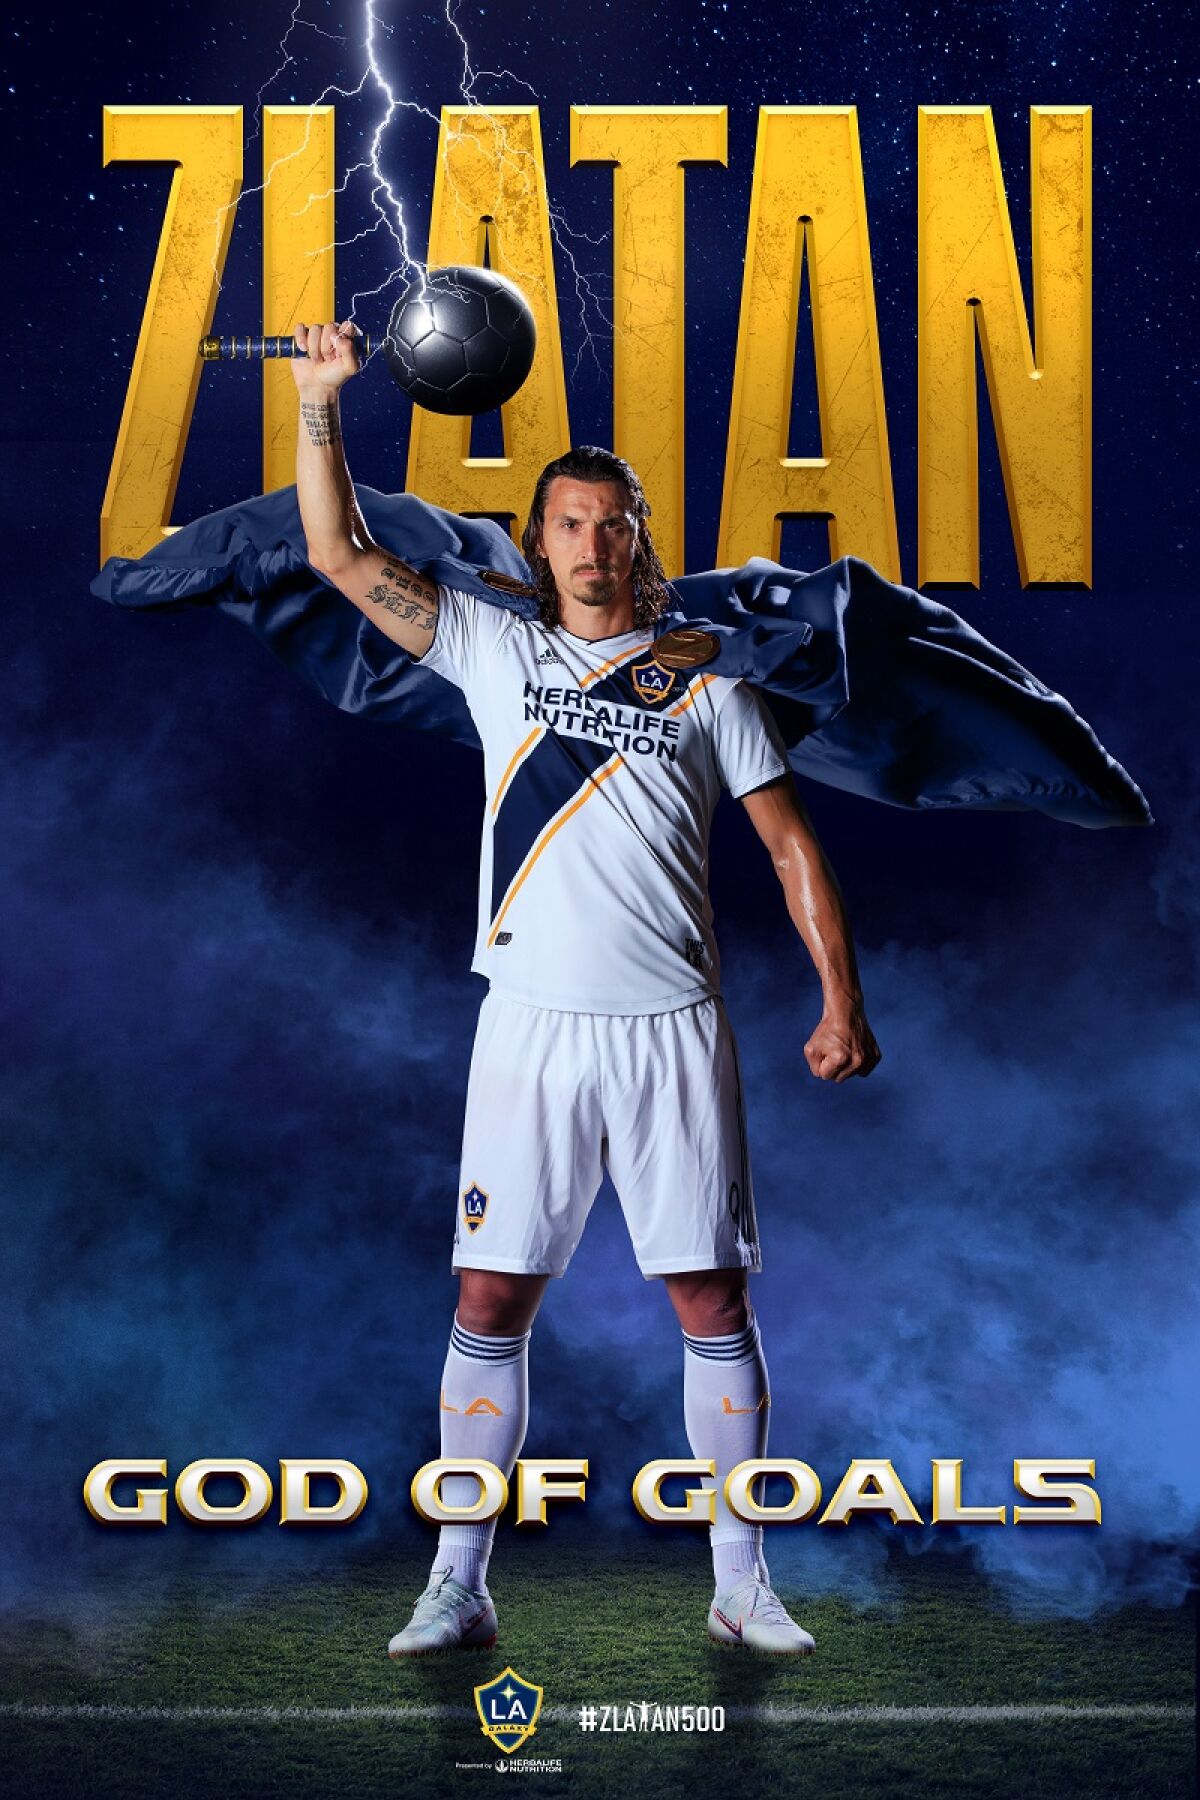 The Costacos' "God of Goals" poster of Zlatan Ibrahimovic